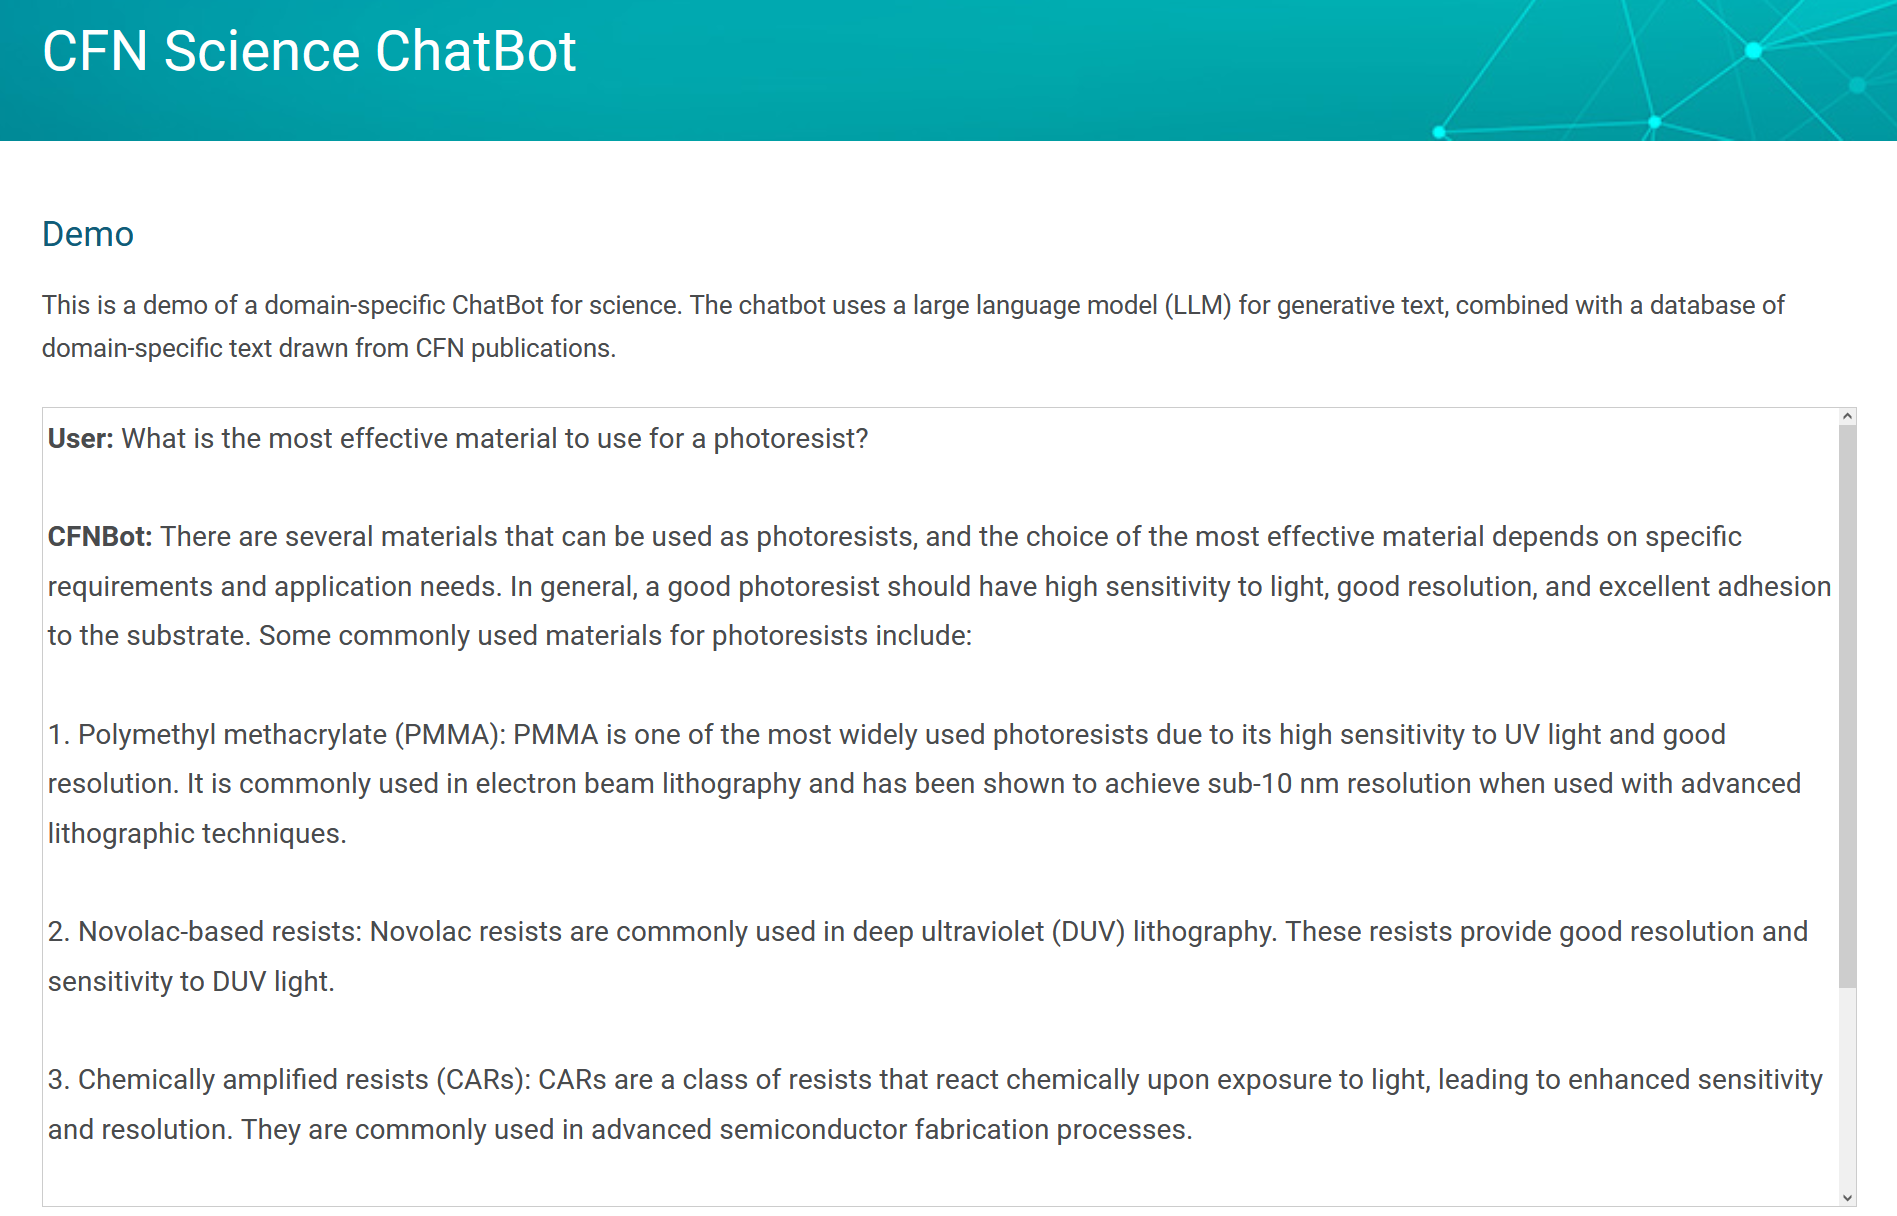 Screenshot of CFN Science Chatbot prompt and response